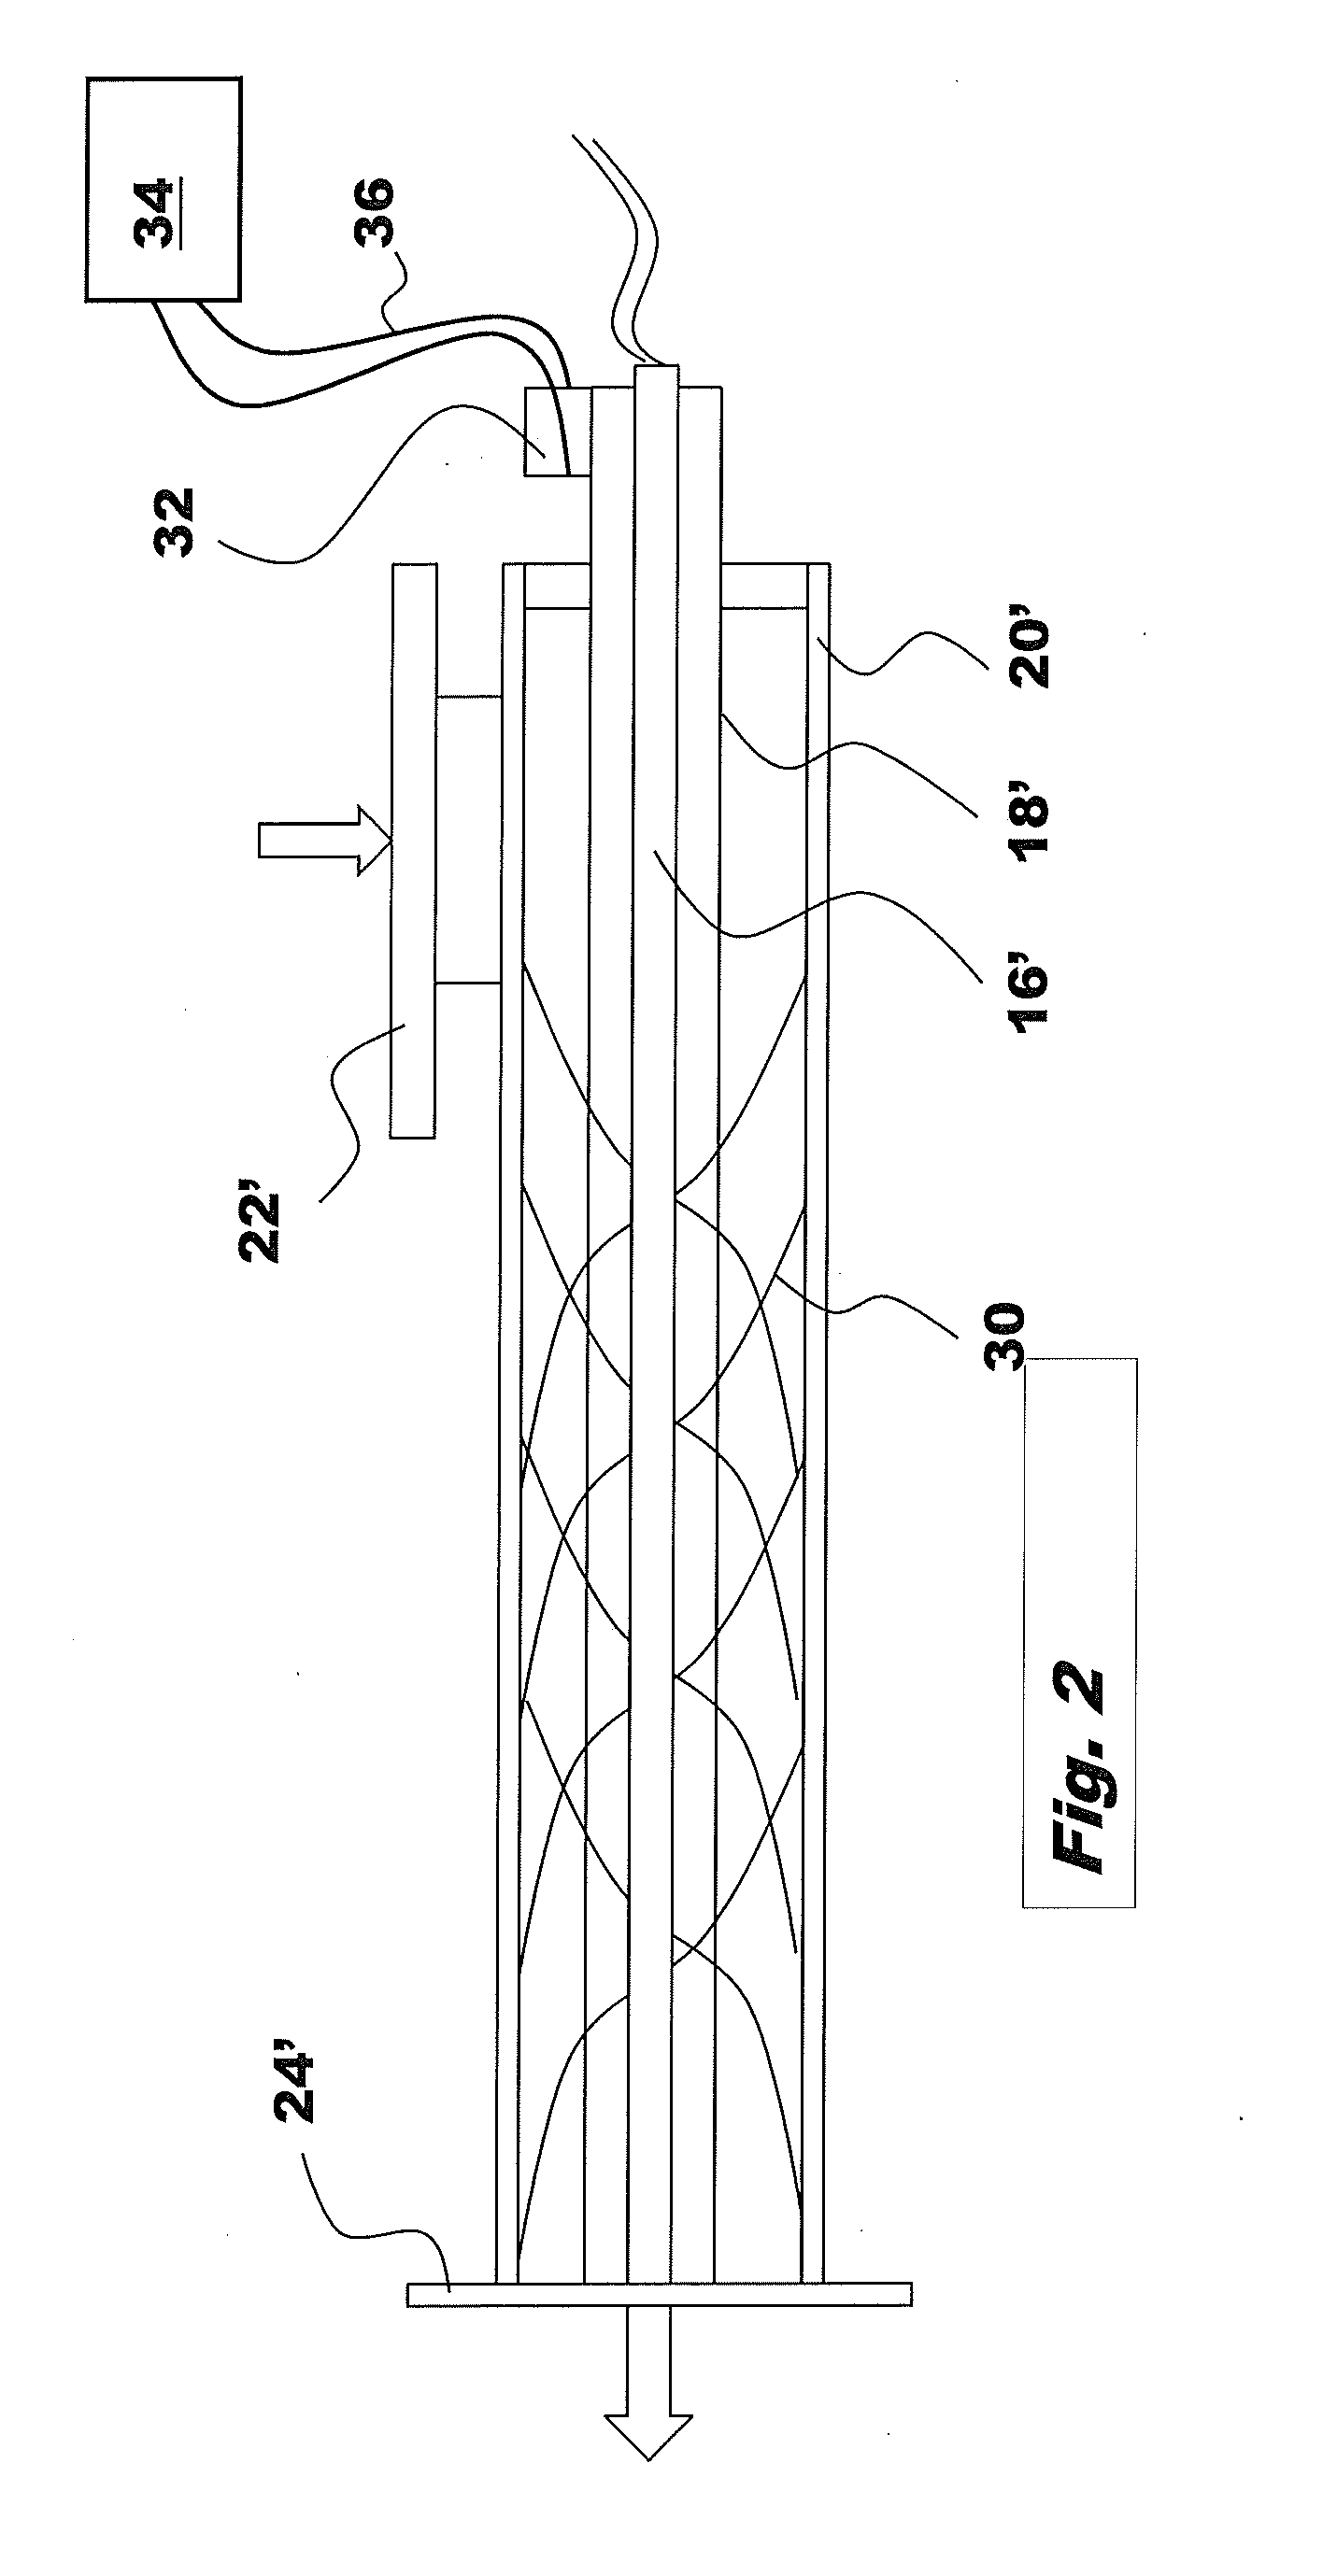 Method and Device for Treating Opaque Fluids with UV Radiation